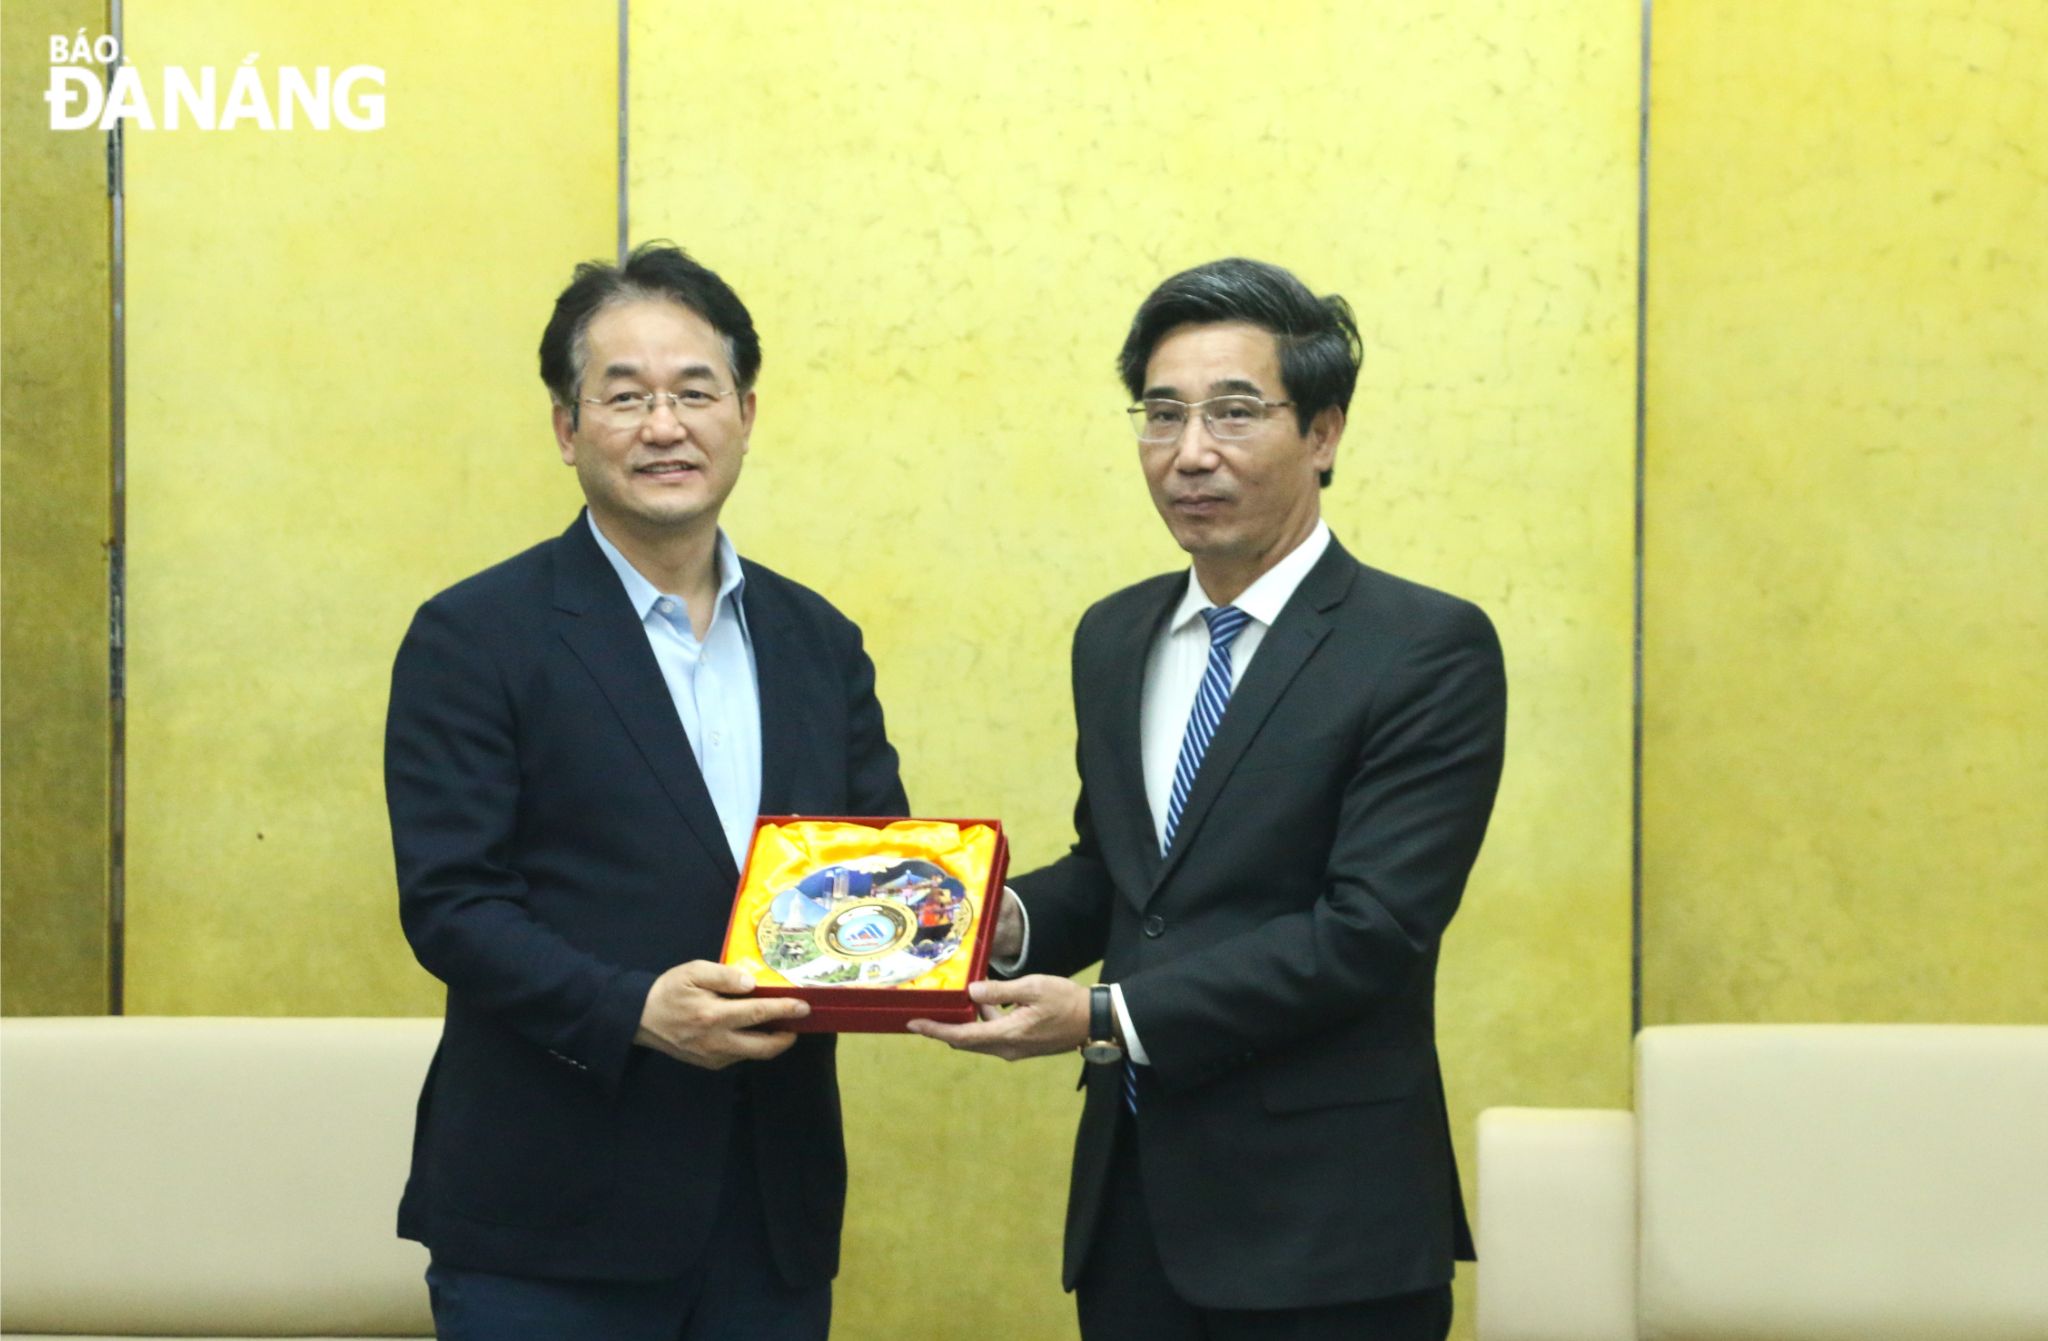 Vice Chairman of the Da Nang People's Committee Tran Chi Cuong (right) presenting a souvenir to Mayor Lee Dong Hwan. Photo: T.PHUONG